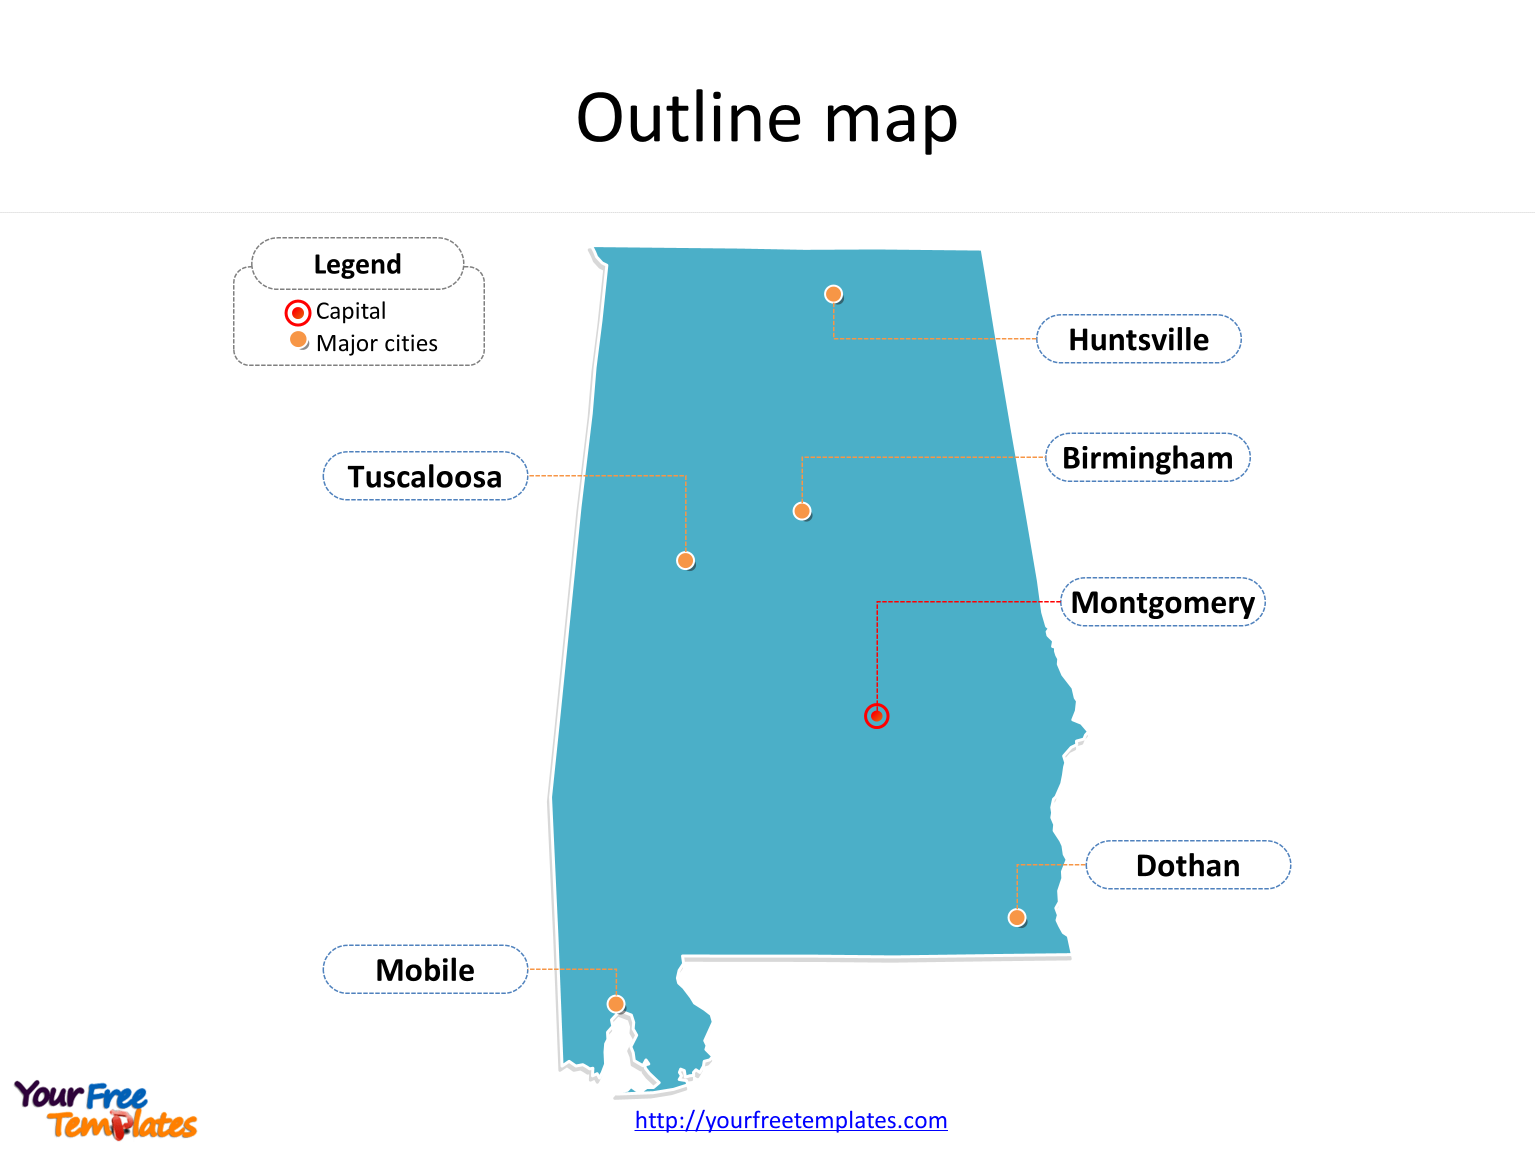 Map of Alabama with outline and cities labeled on the Alabama map Free templates